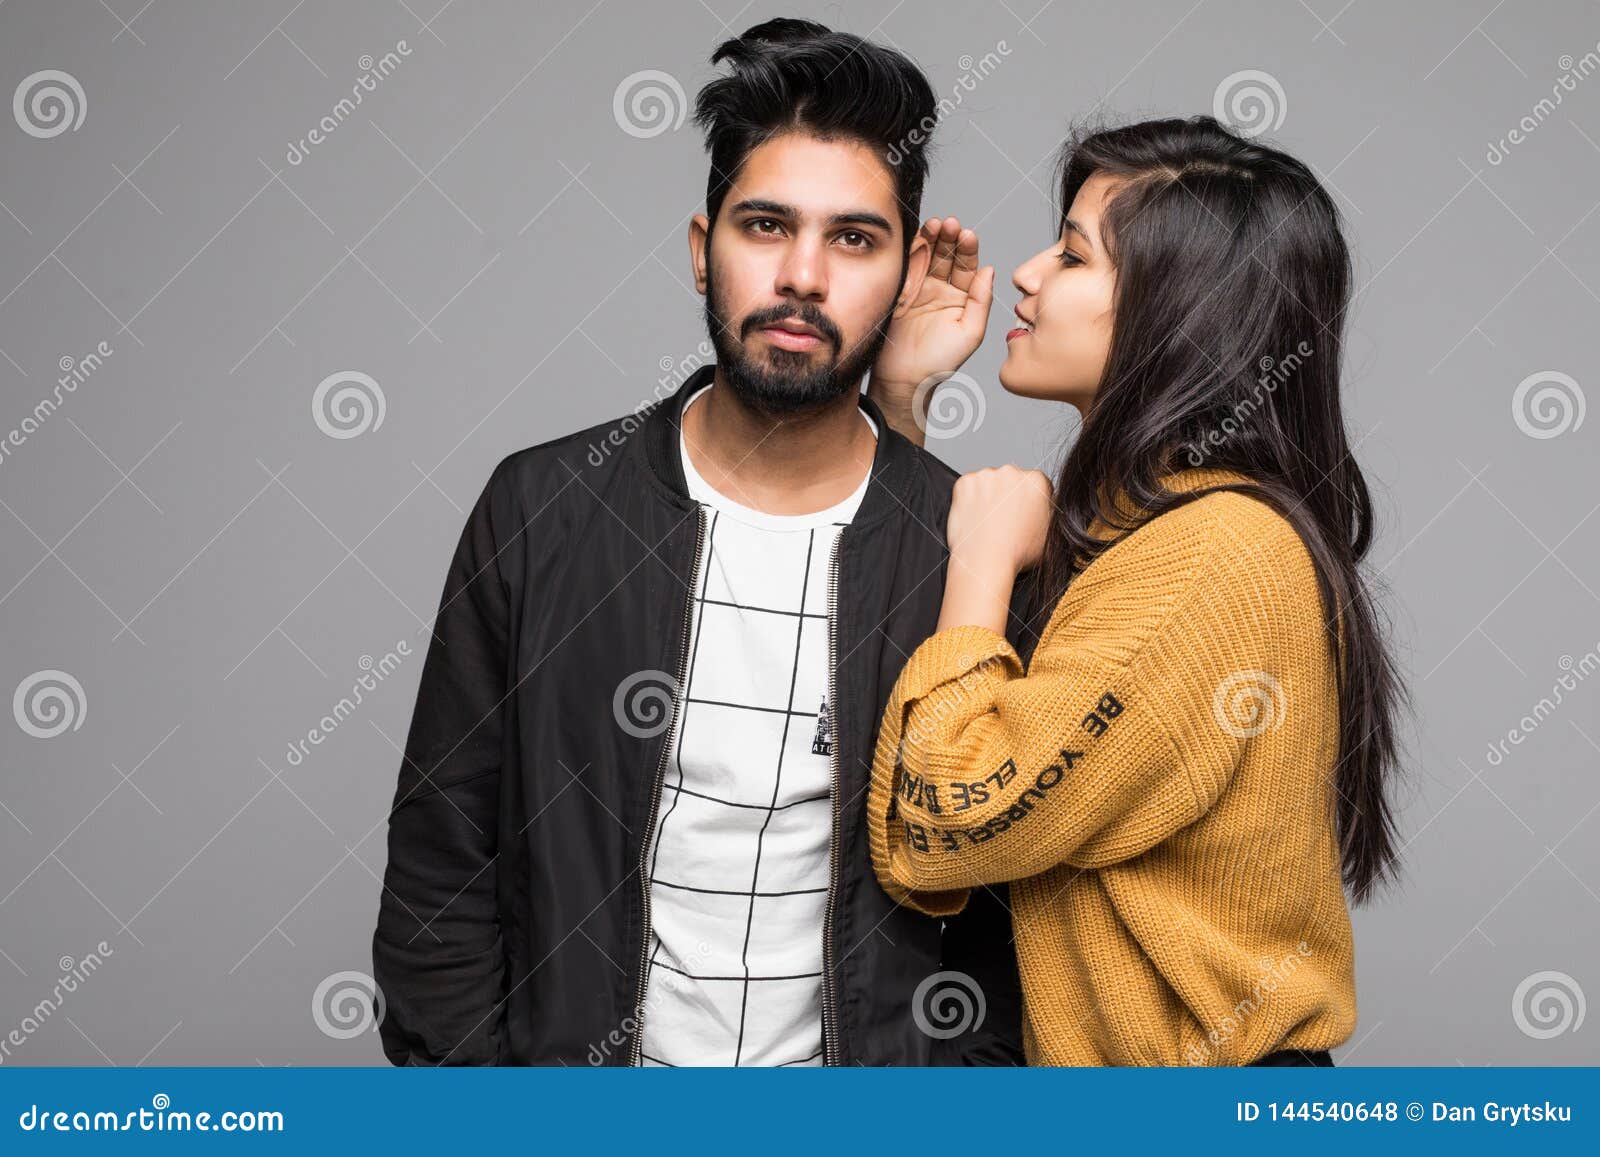 Beautiful Indian Woman Whispering To Boyfriends Ear Isolated on Gray Background Stock Photo pic